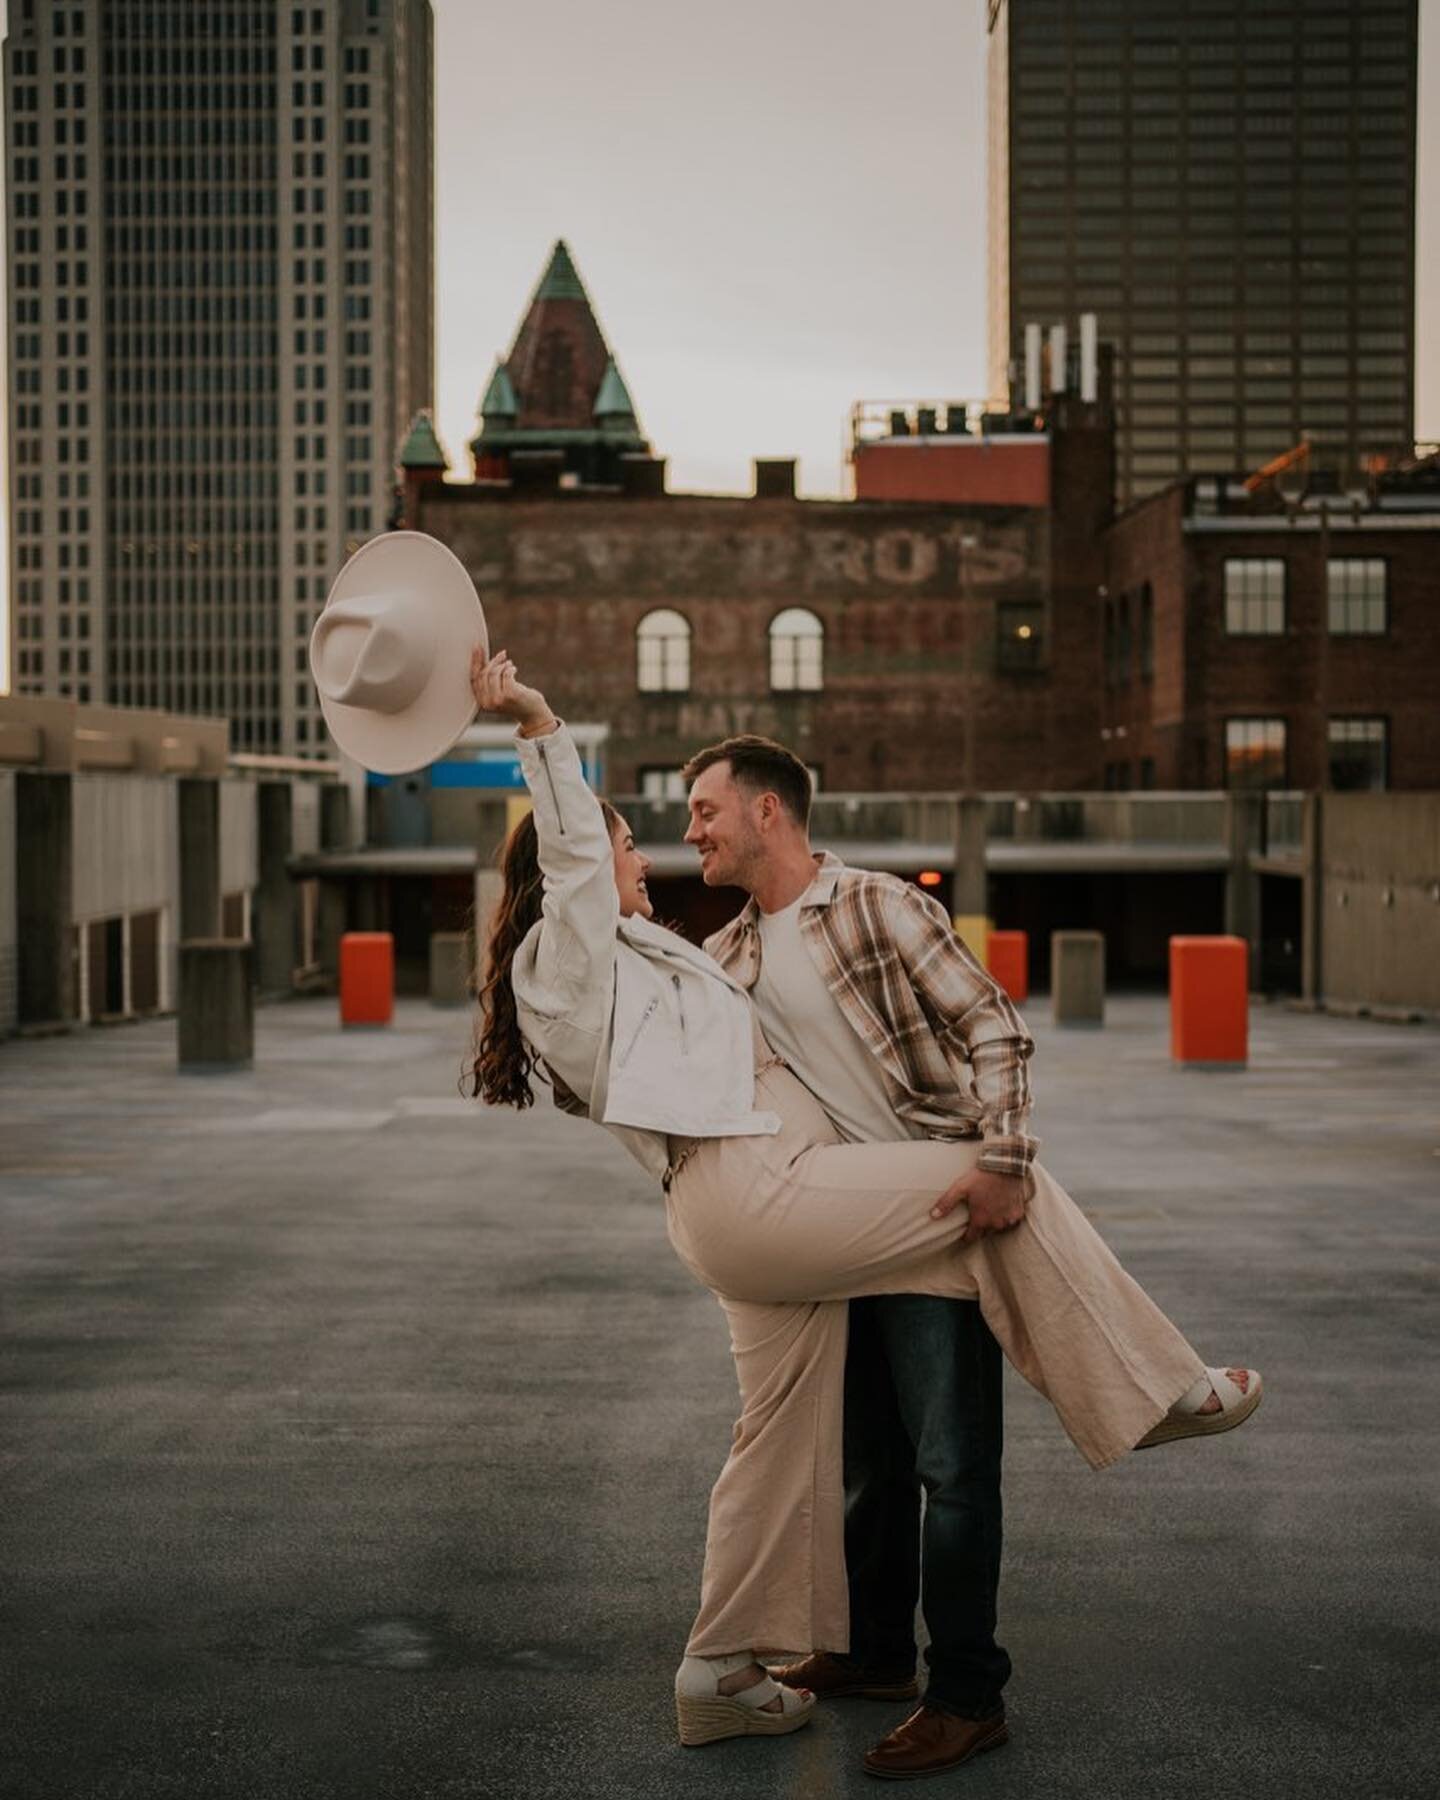 Rooftops, music, and 1950s vibes all in one engagement shoot. I had so much fun bringing @nikmarie77&rsquo;s vision to life! 😍